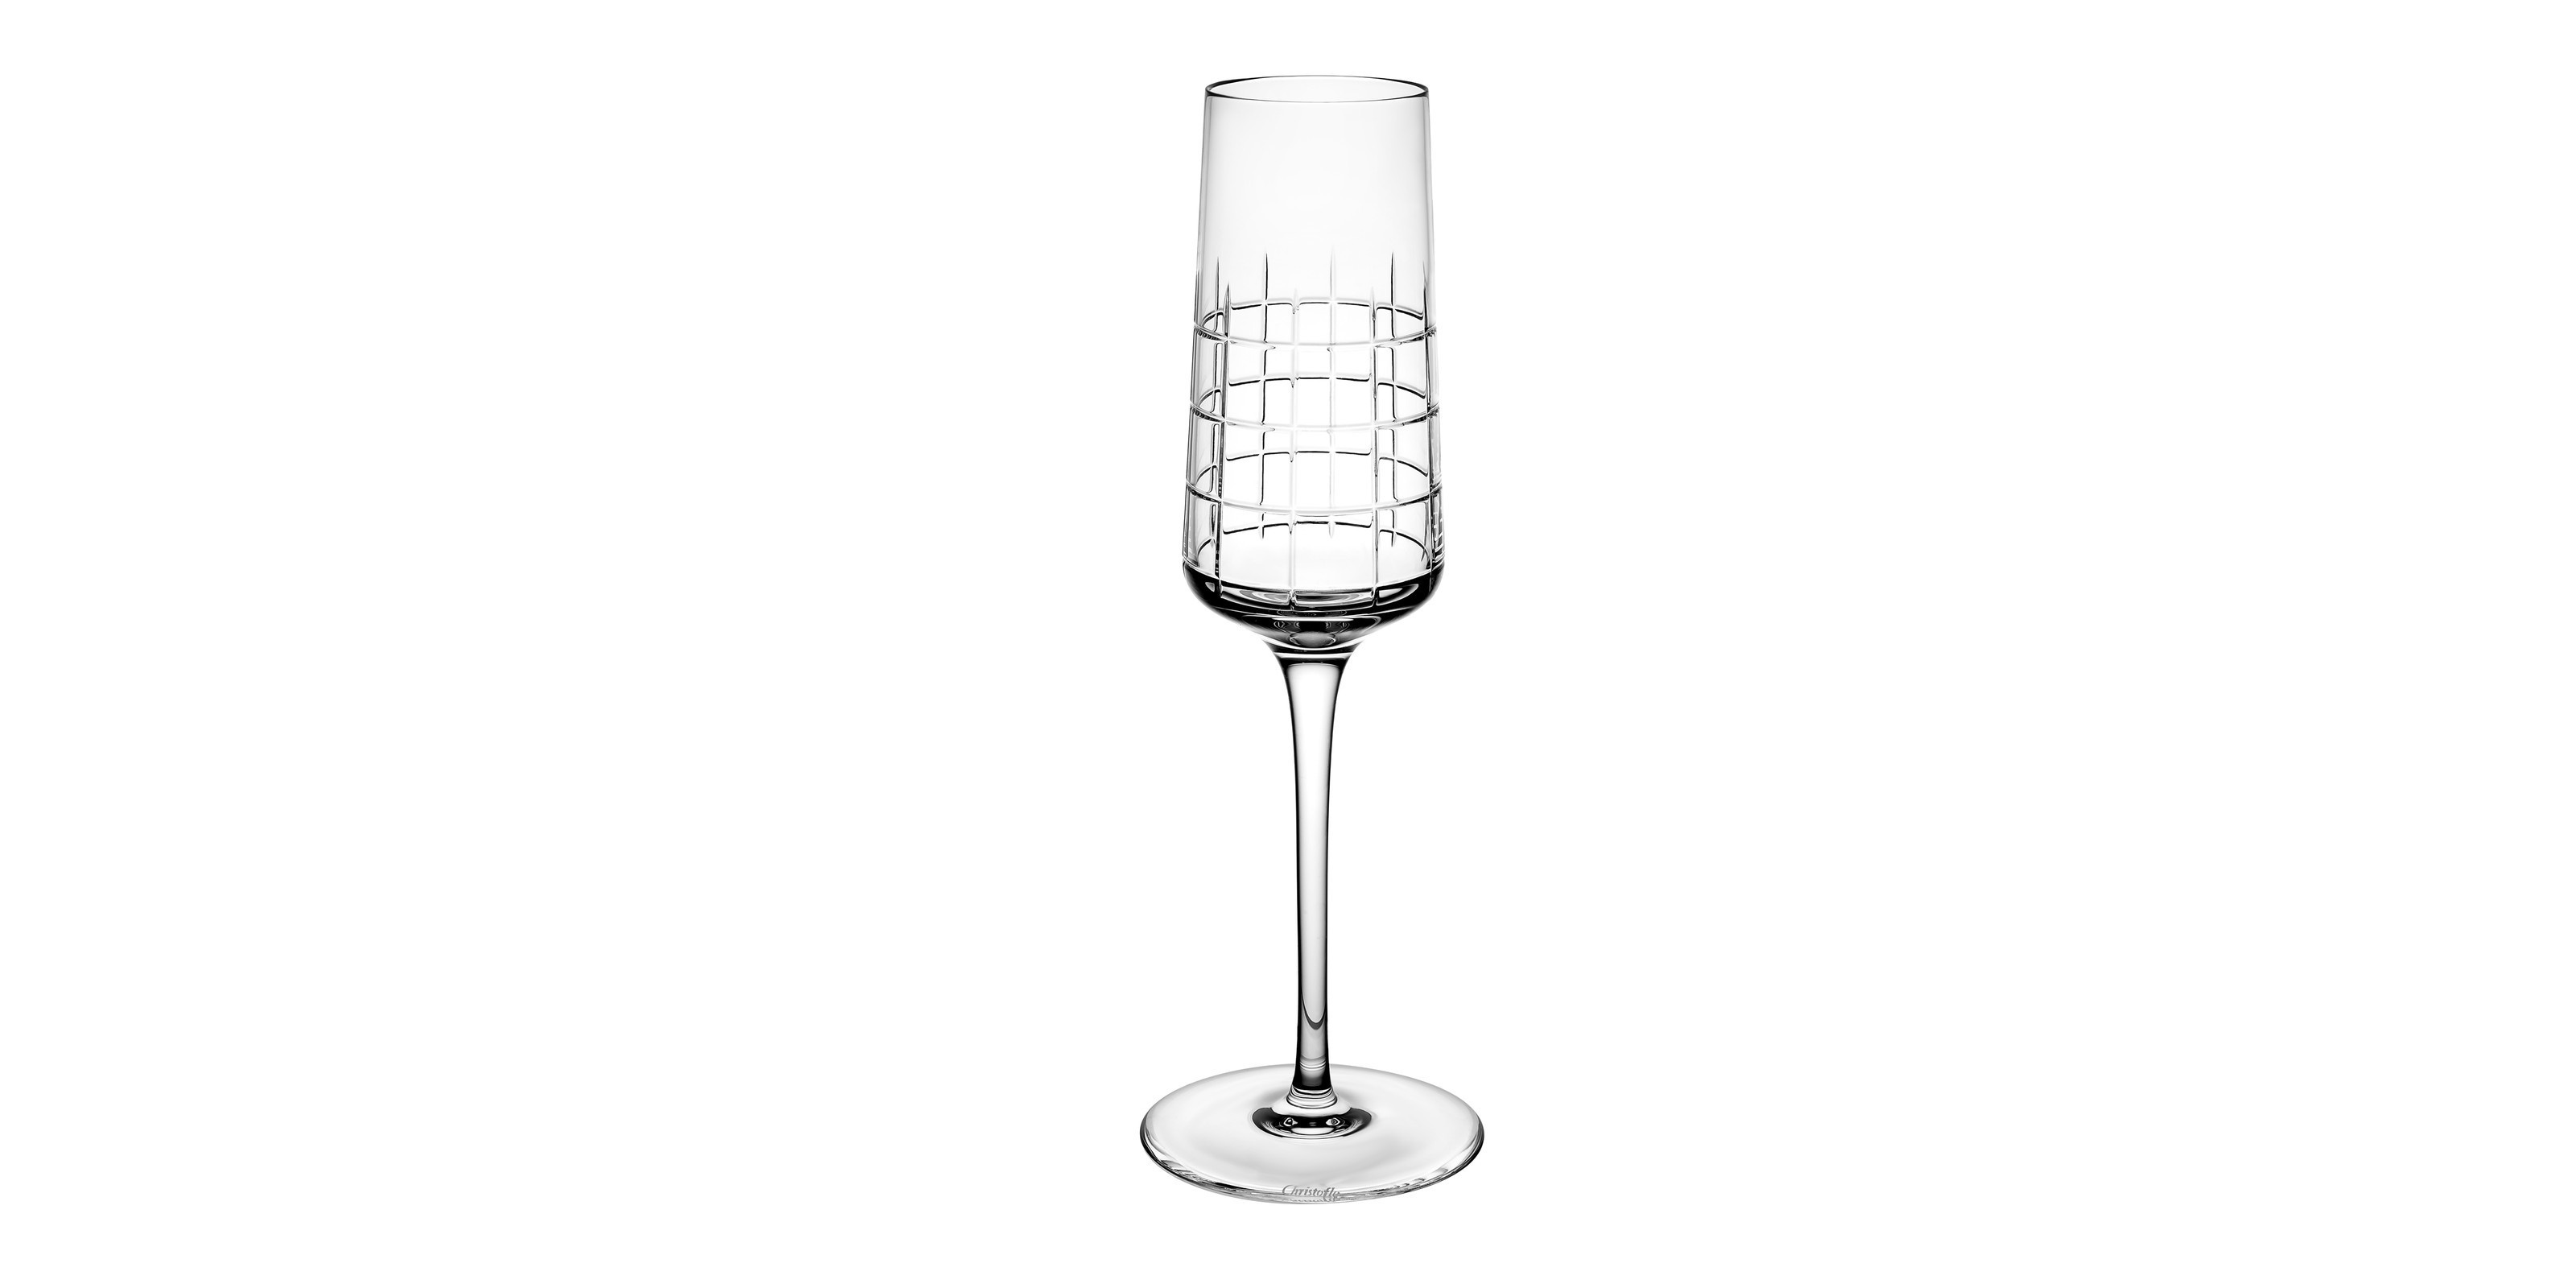 20 attractive Christofle Uni Vase 2024 free download christofle uni vase of tableware porcelain plates serving dishes table accessories inside champagne flute in crystal